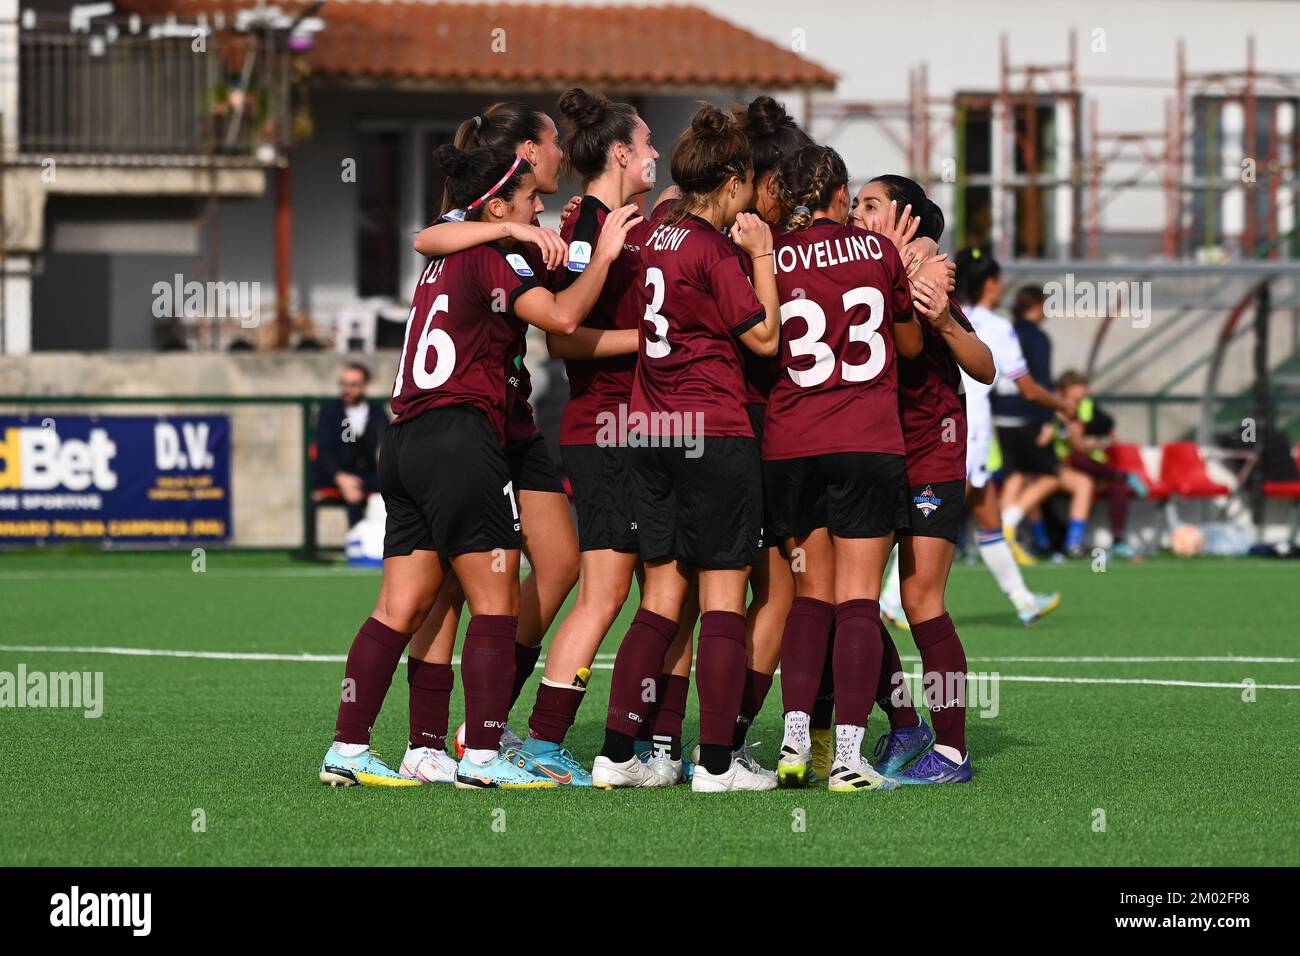 PALMA CAMPANIA, ITALY - DECEMBER 03: Veronica Battelani of Pomigliano CF Women celebrates with teammates after scoring during the Women Serie A match between Pomigliano CF Women and Sampdoria Women at Stadio Comunale on December 03, 2022 in Palma Campania, Italy - Photo by Nicola Ianuale Credit: Nicola Ianuale/Alamy Live News Stock Photo